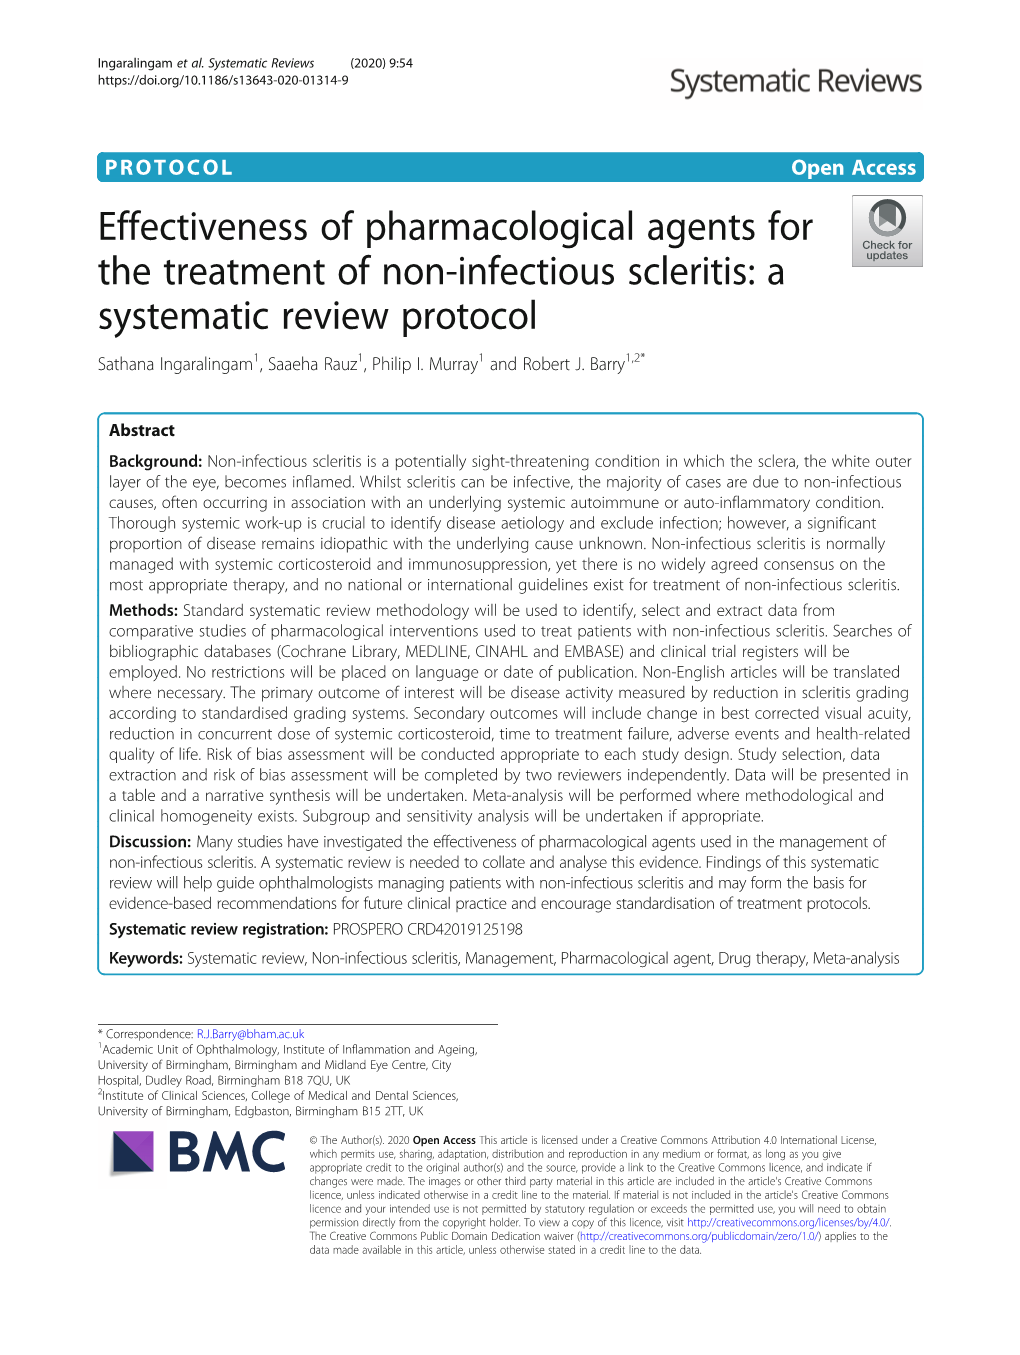 Effectiveness of Pharmacological Agents for the Treatment of Non-Infectious Scleritis: a Systematic Review Protocol Sathana Ingaralingam1, Saaeha Rauz1, Philip I